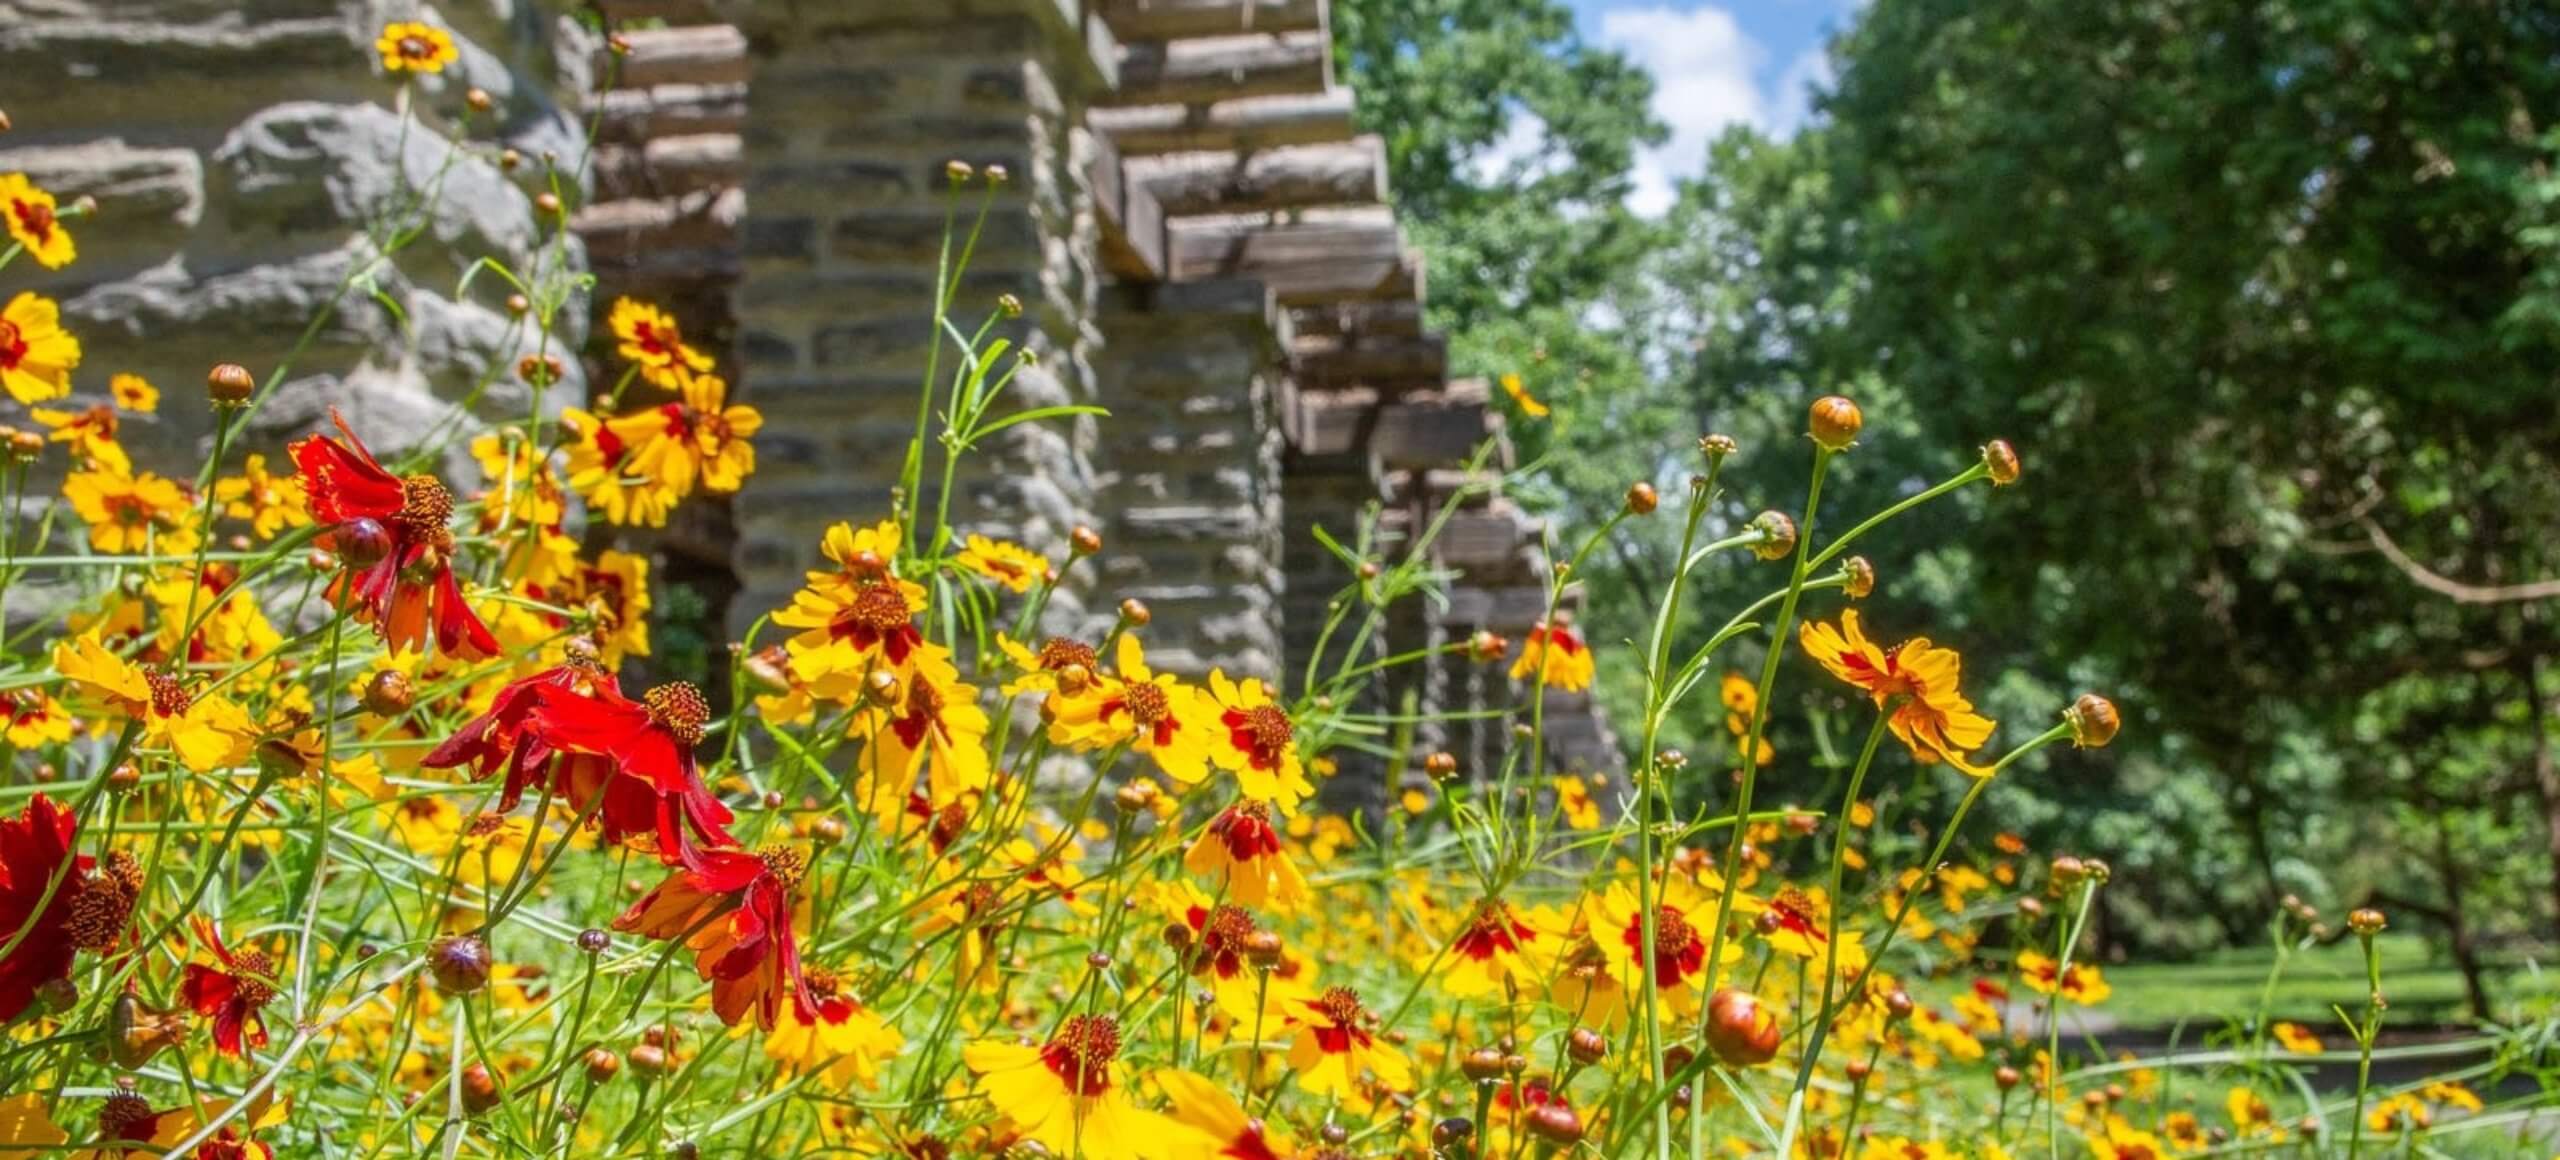 Bright yellow and red flowers bloom in the sunshine in a natural setting. To the left is a stone pergola. To the right are trees. A hint of blue sky peeks through the canopy.